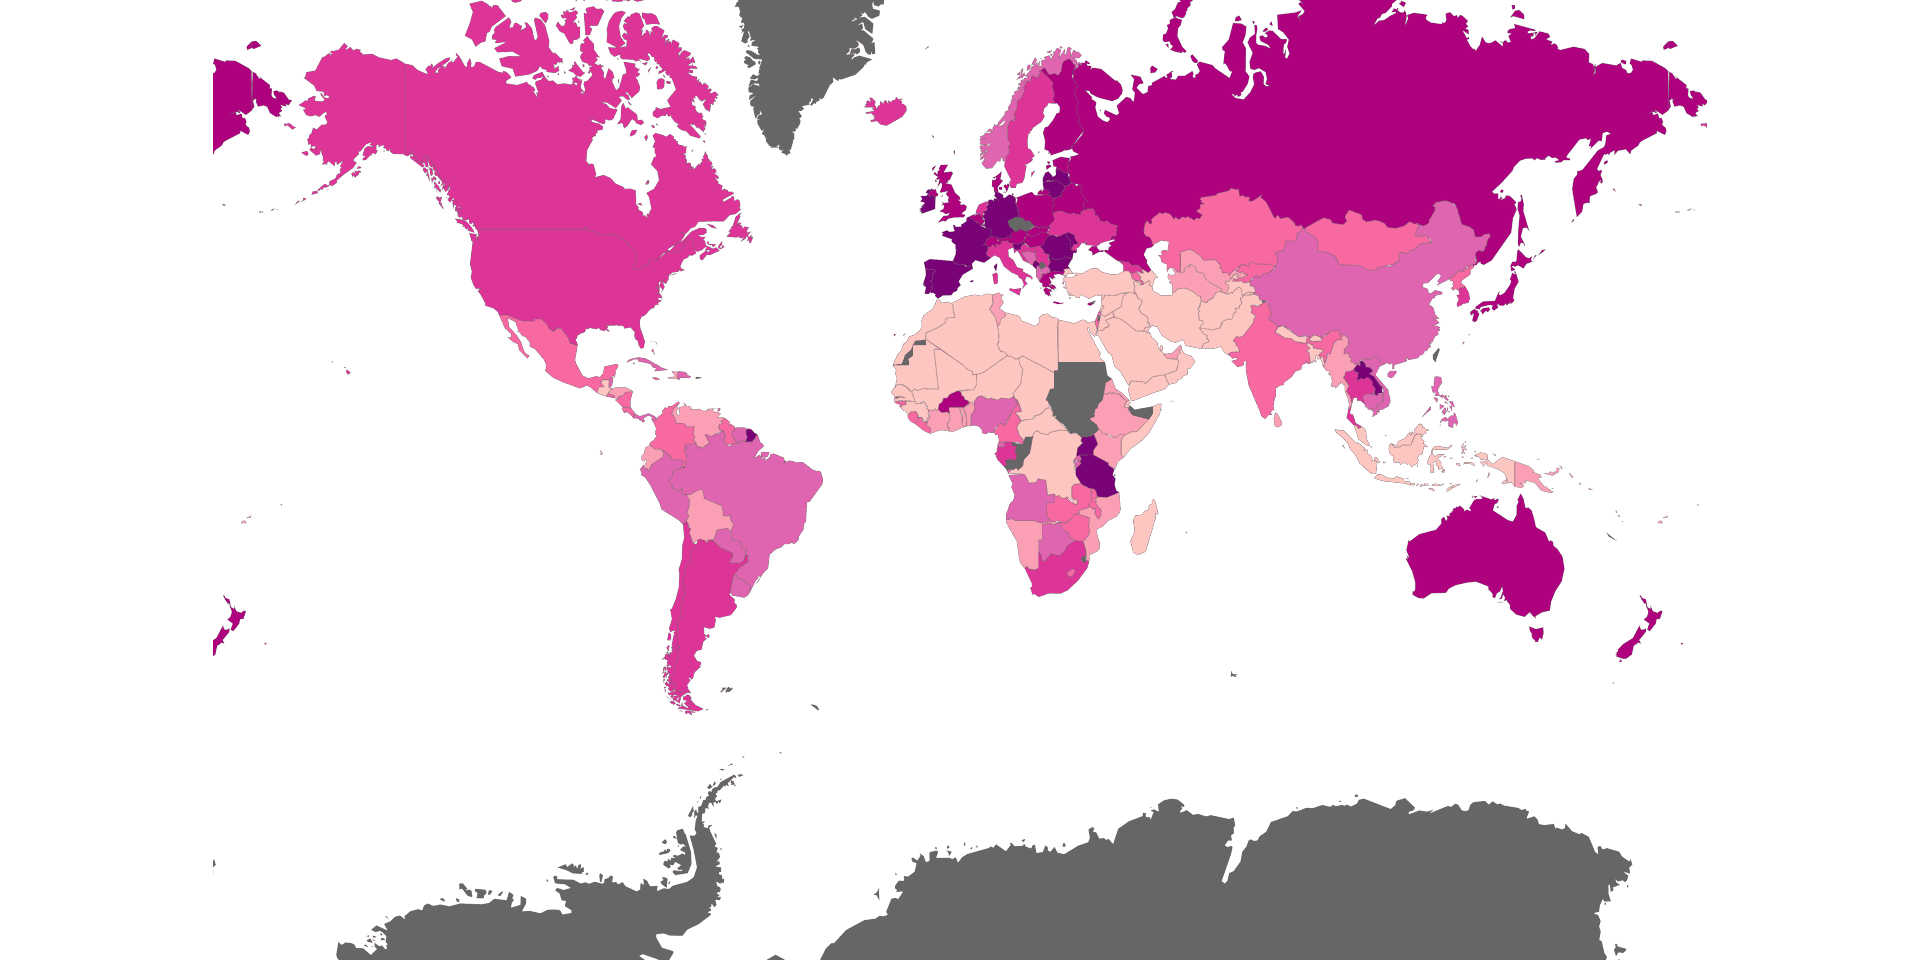 Global Alcohol Consumption Map (WHO, 2019)